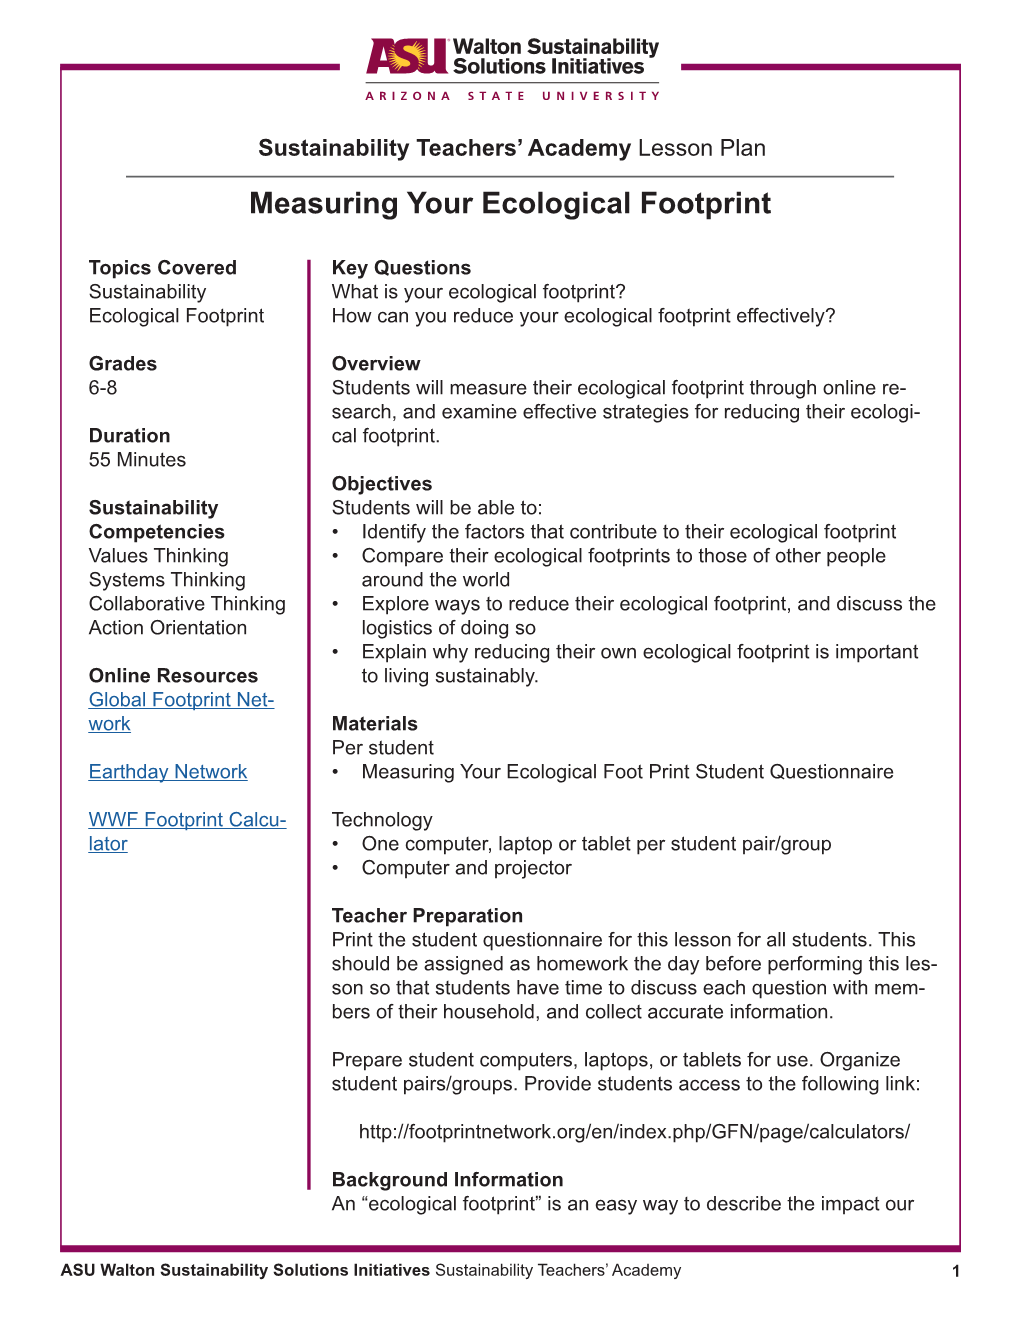 Measuring Your Ecological Footprint